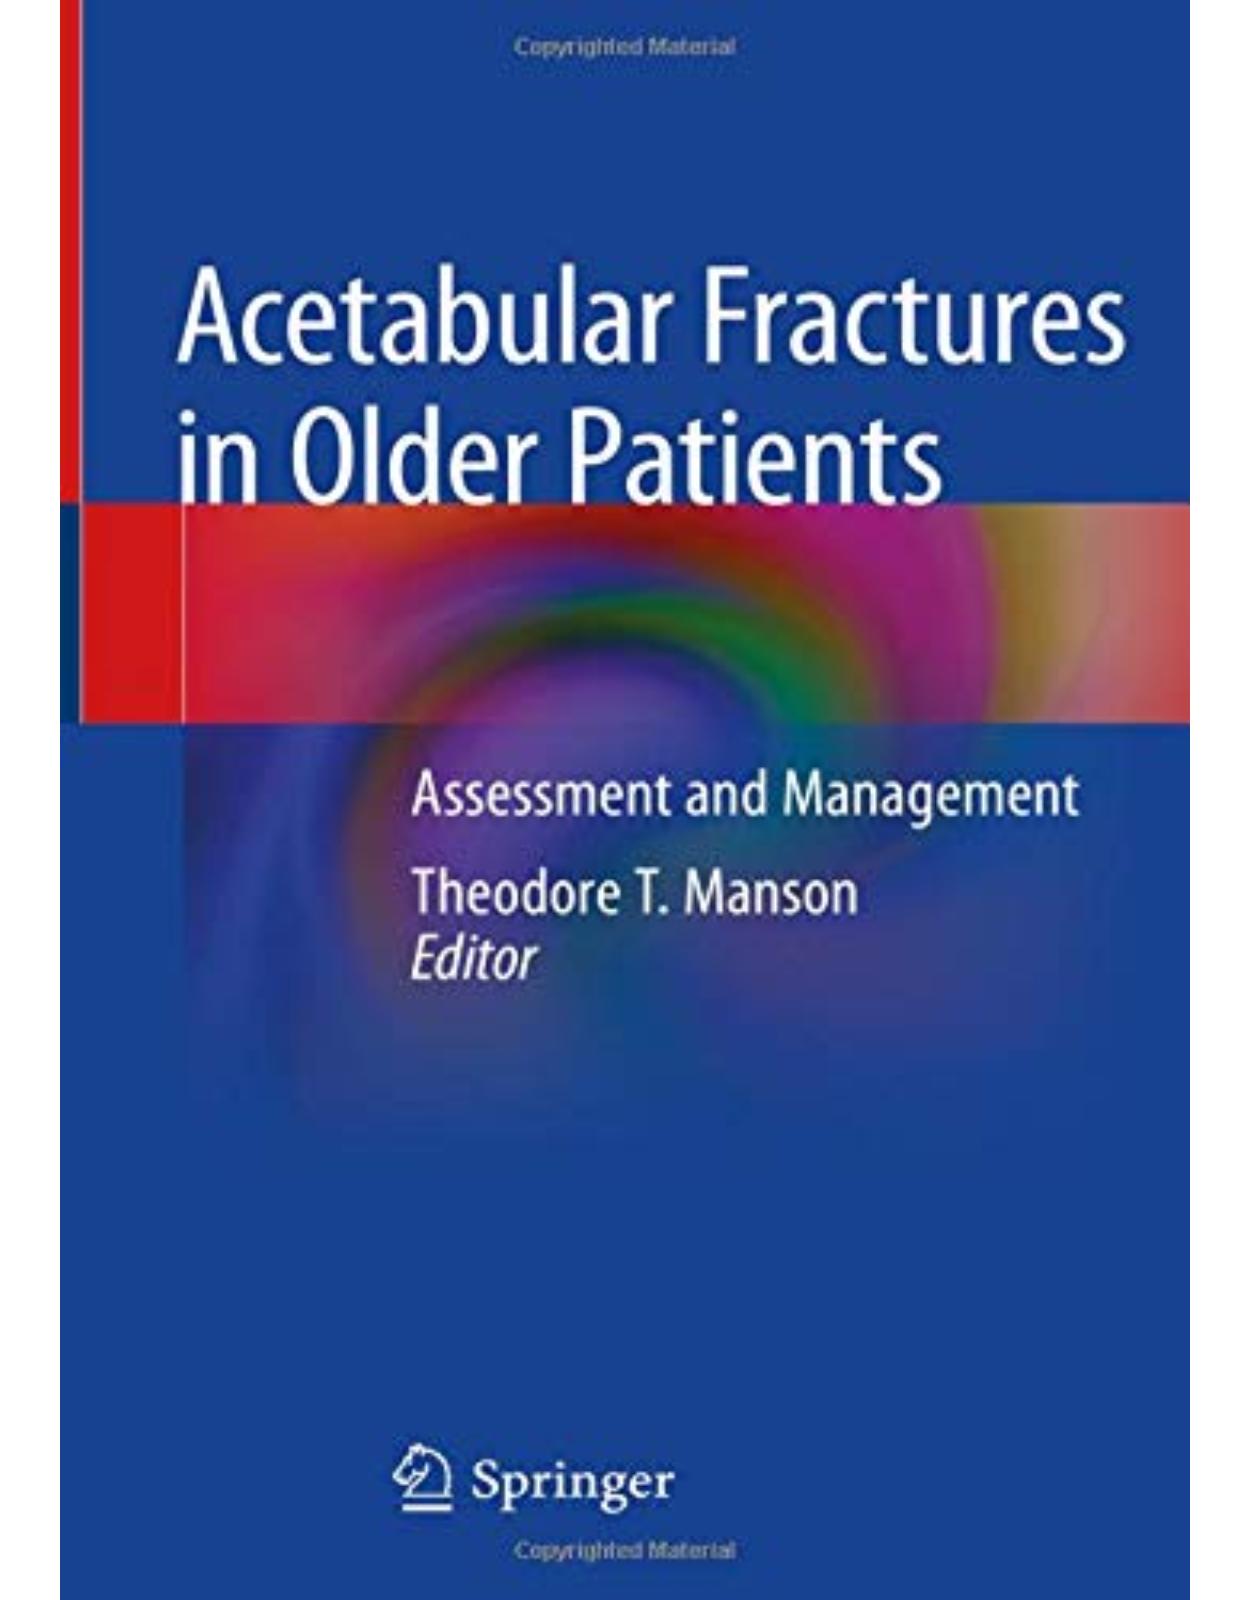 Acetabular Fractures in Older Patients: Assessment and Management